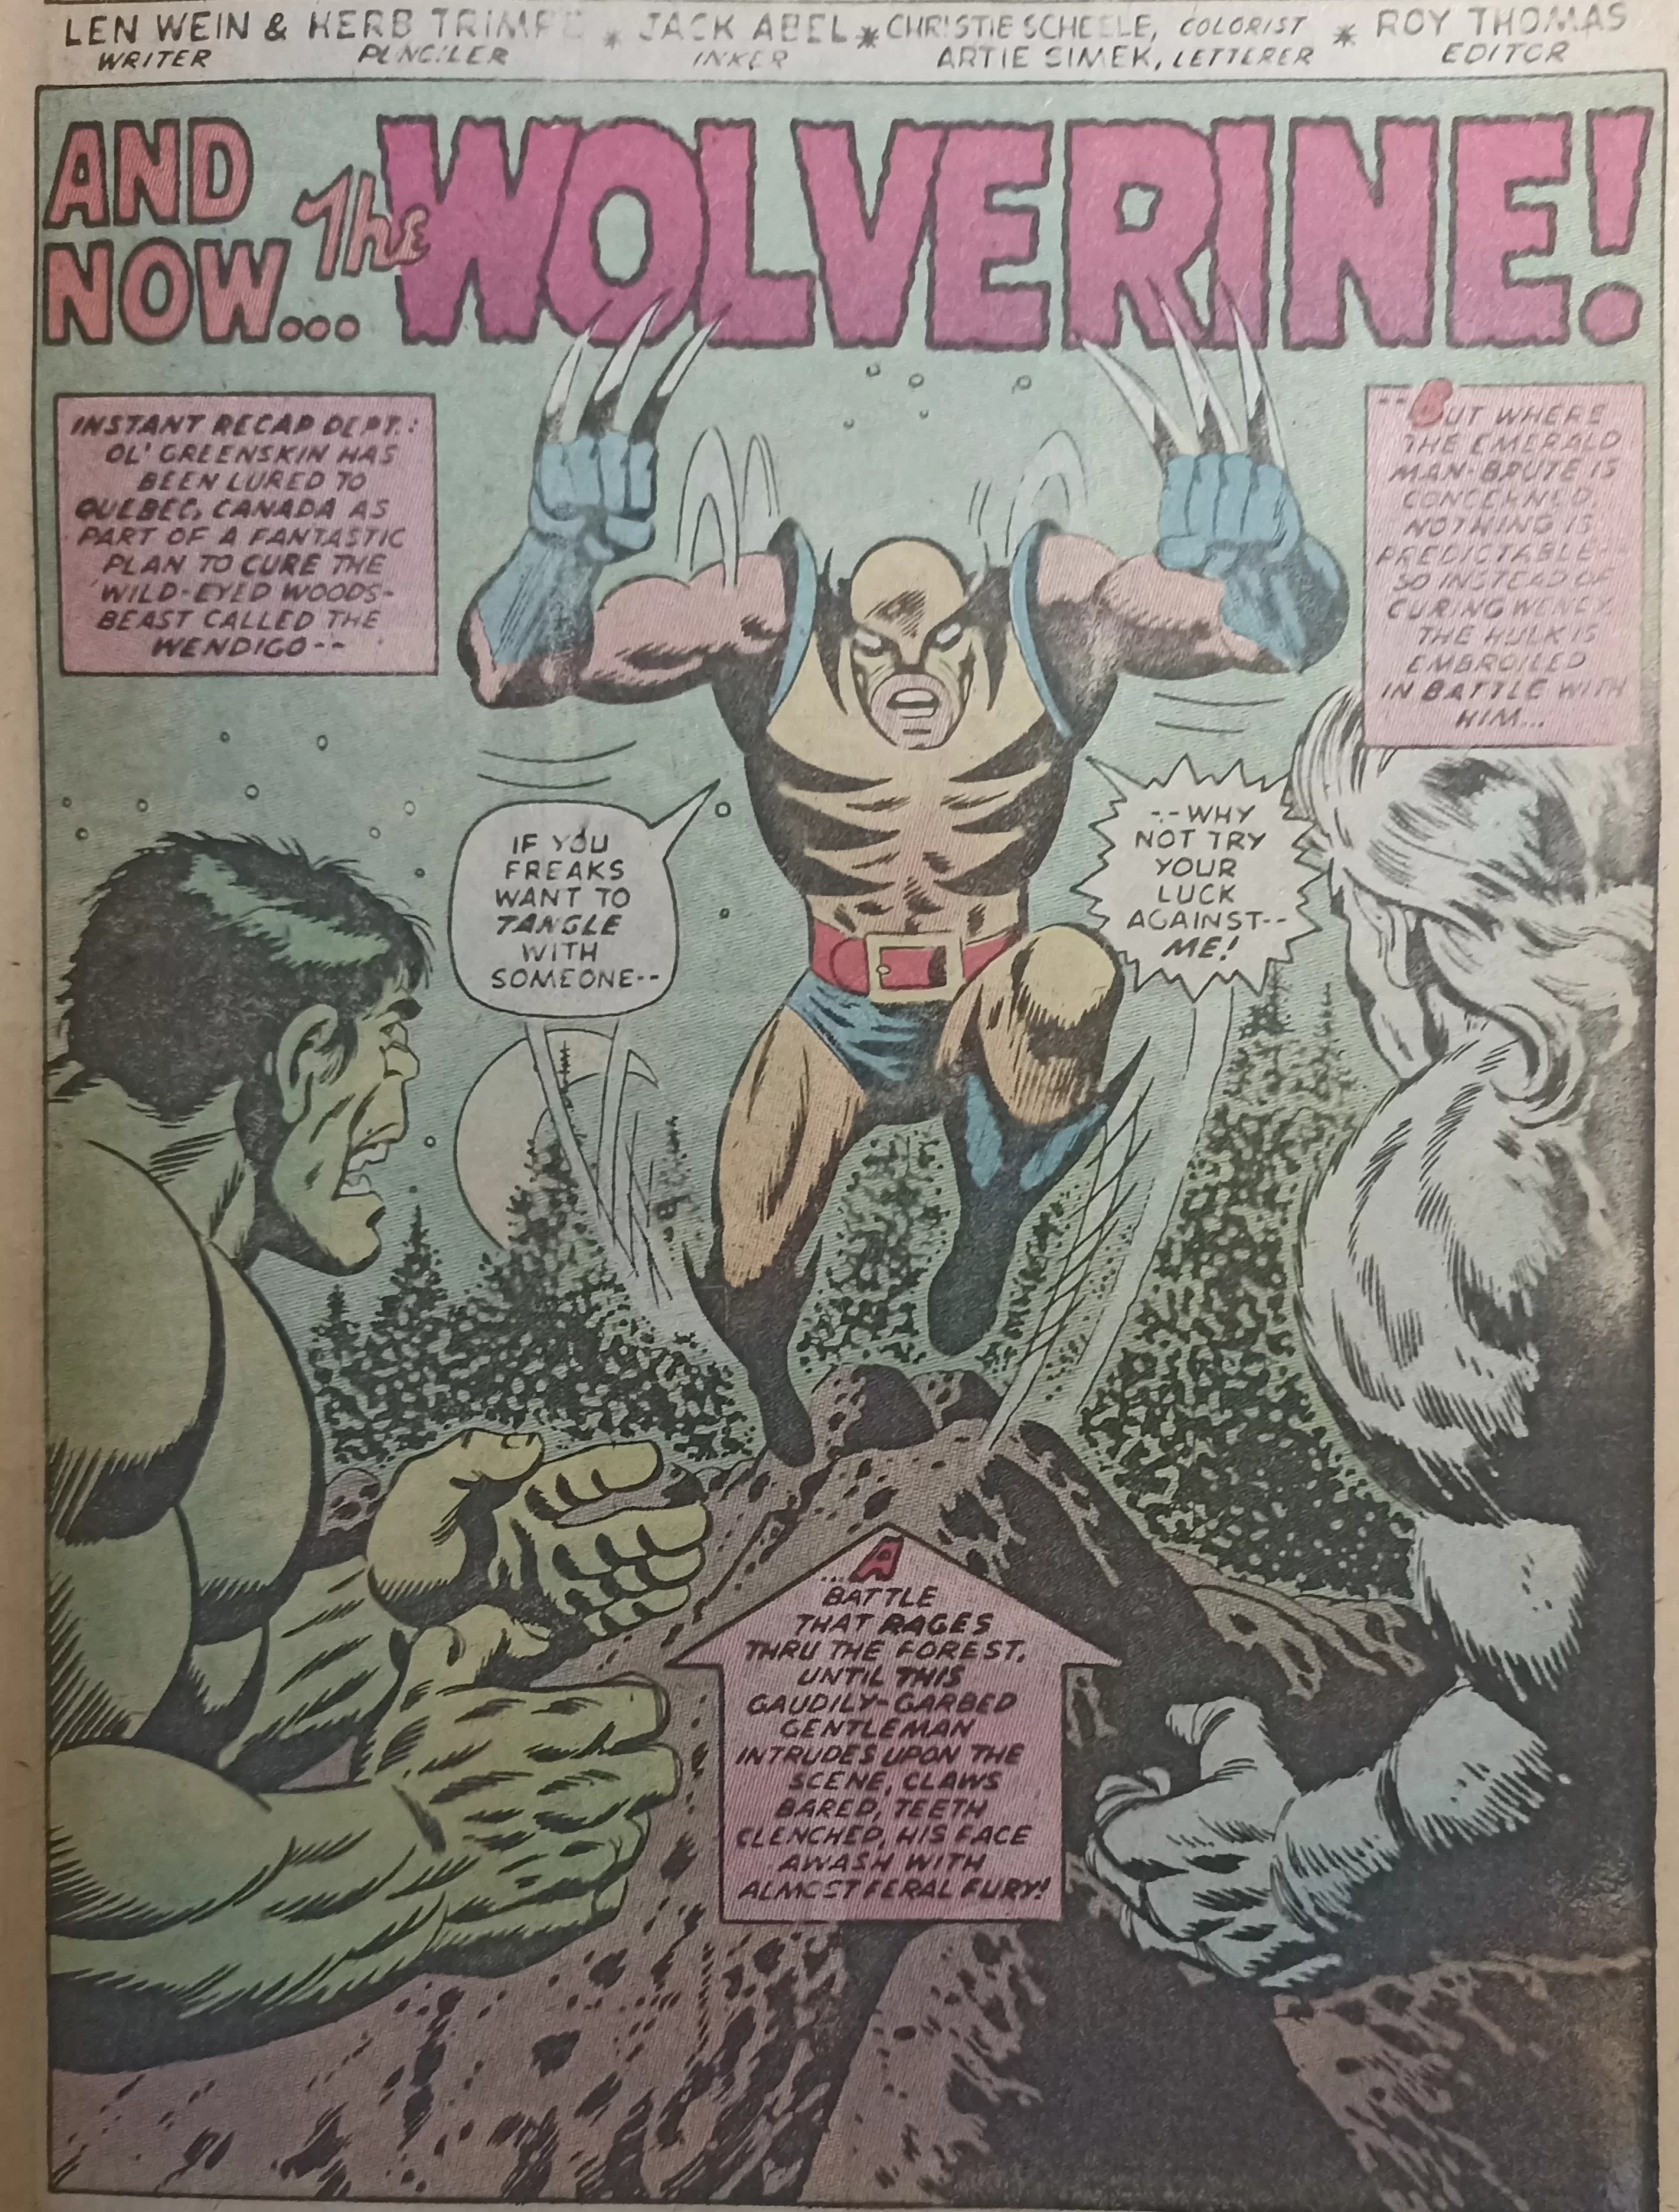 Wolverine's first appearance